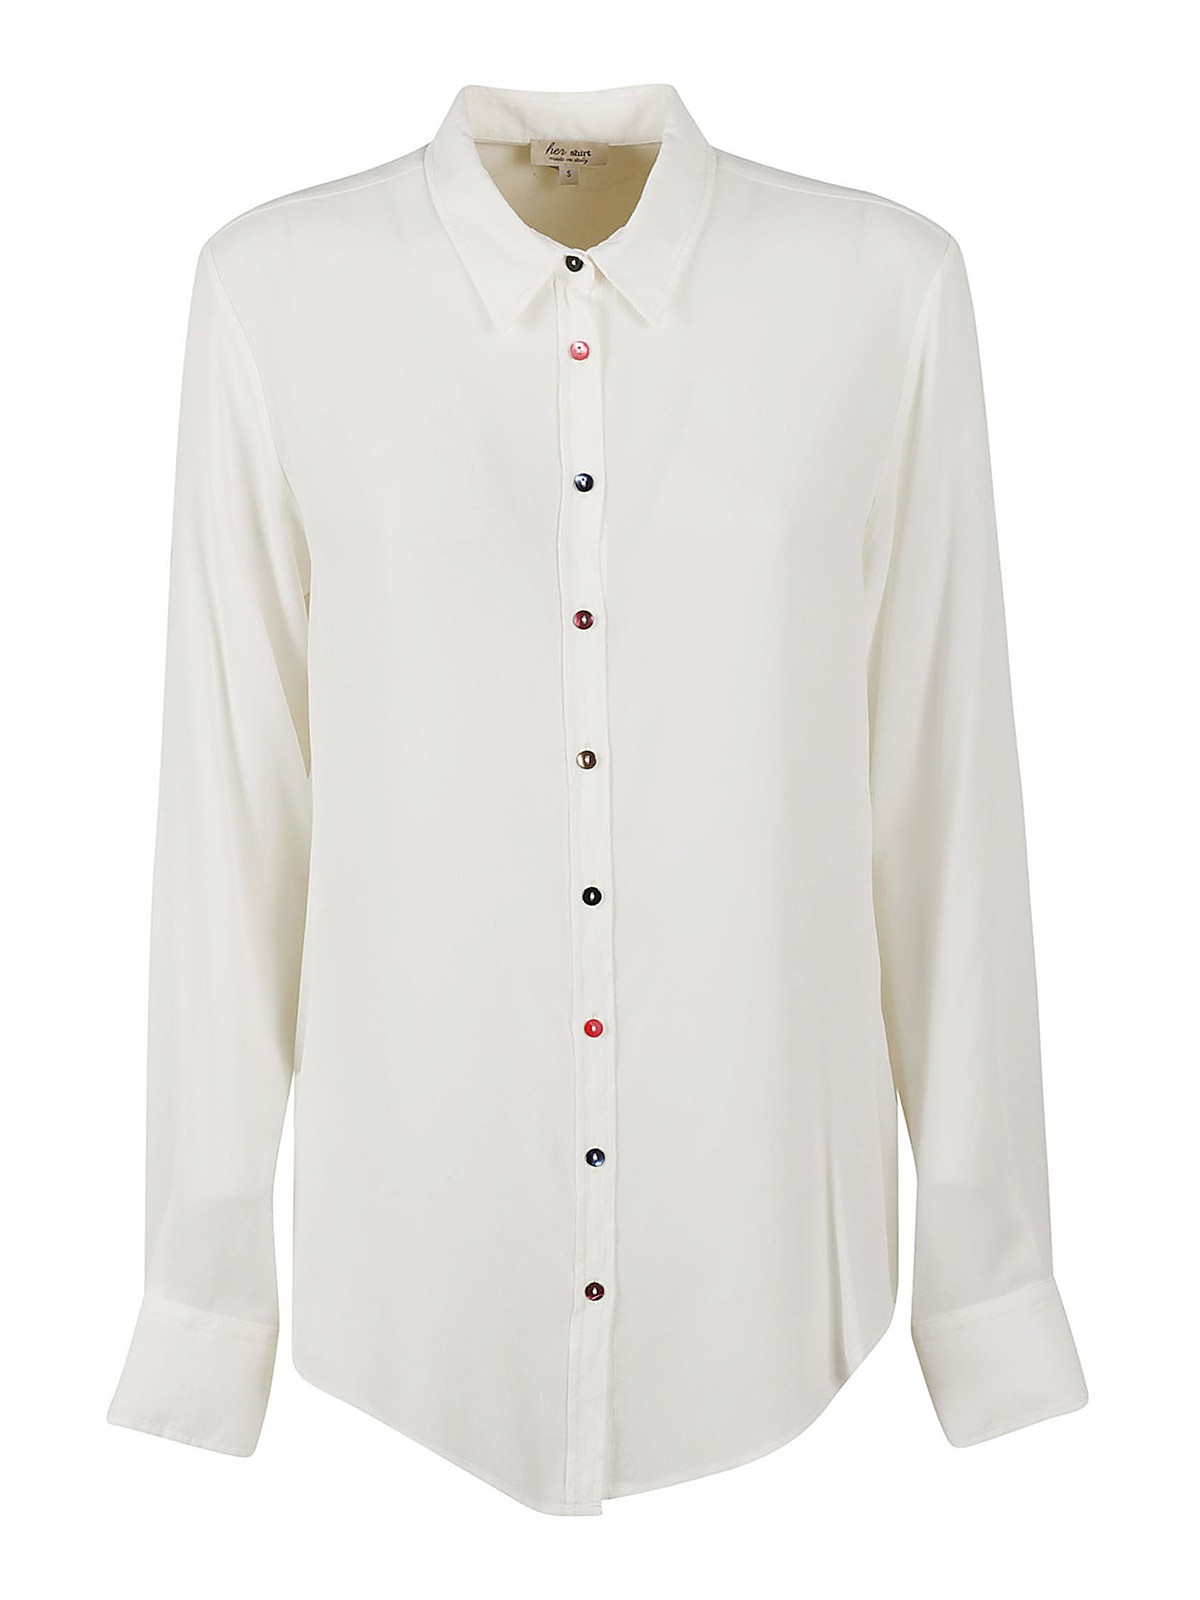 Her Silk Shirt With Different Buttons In White